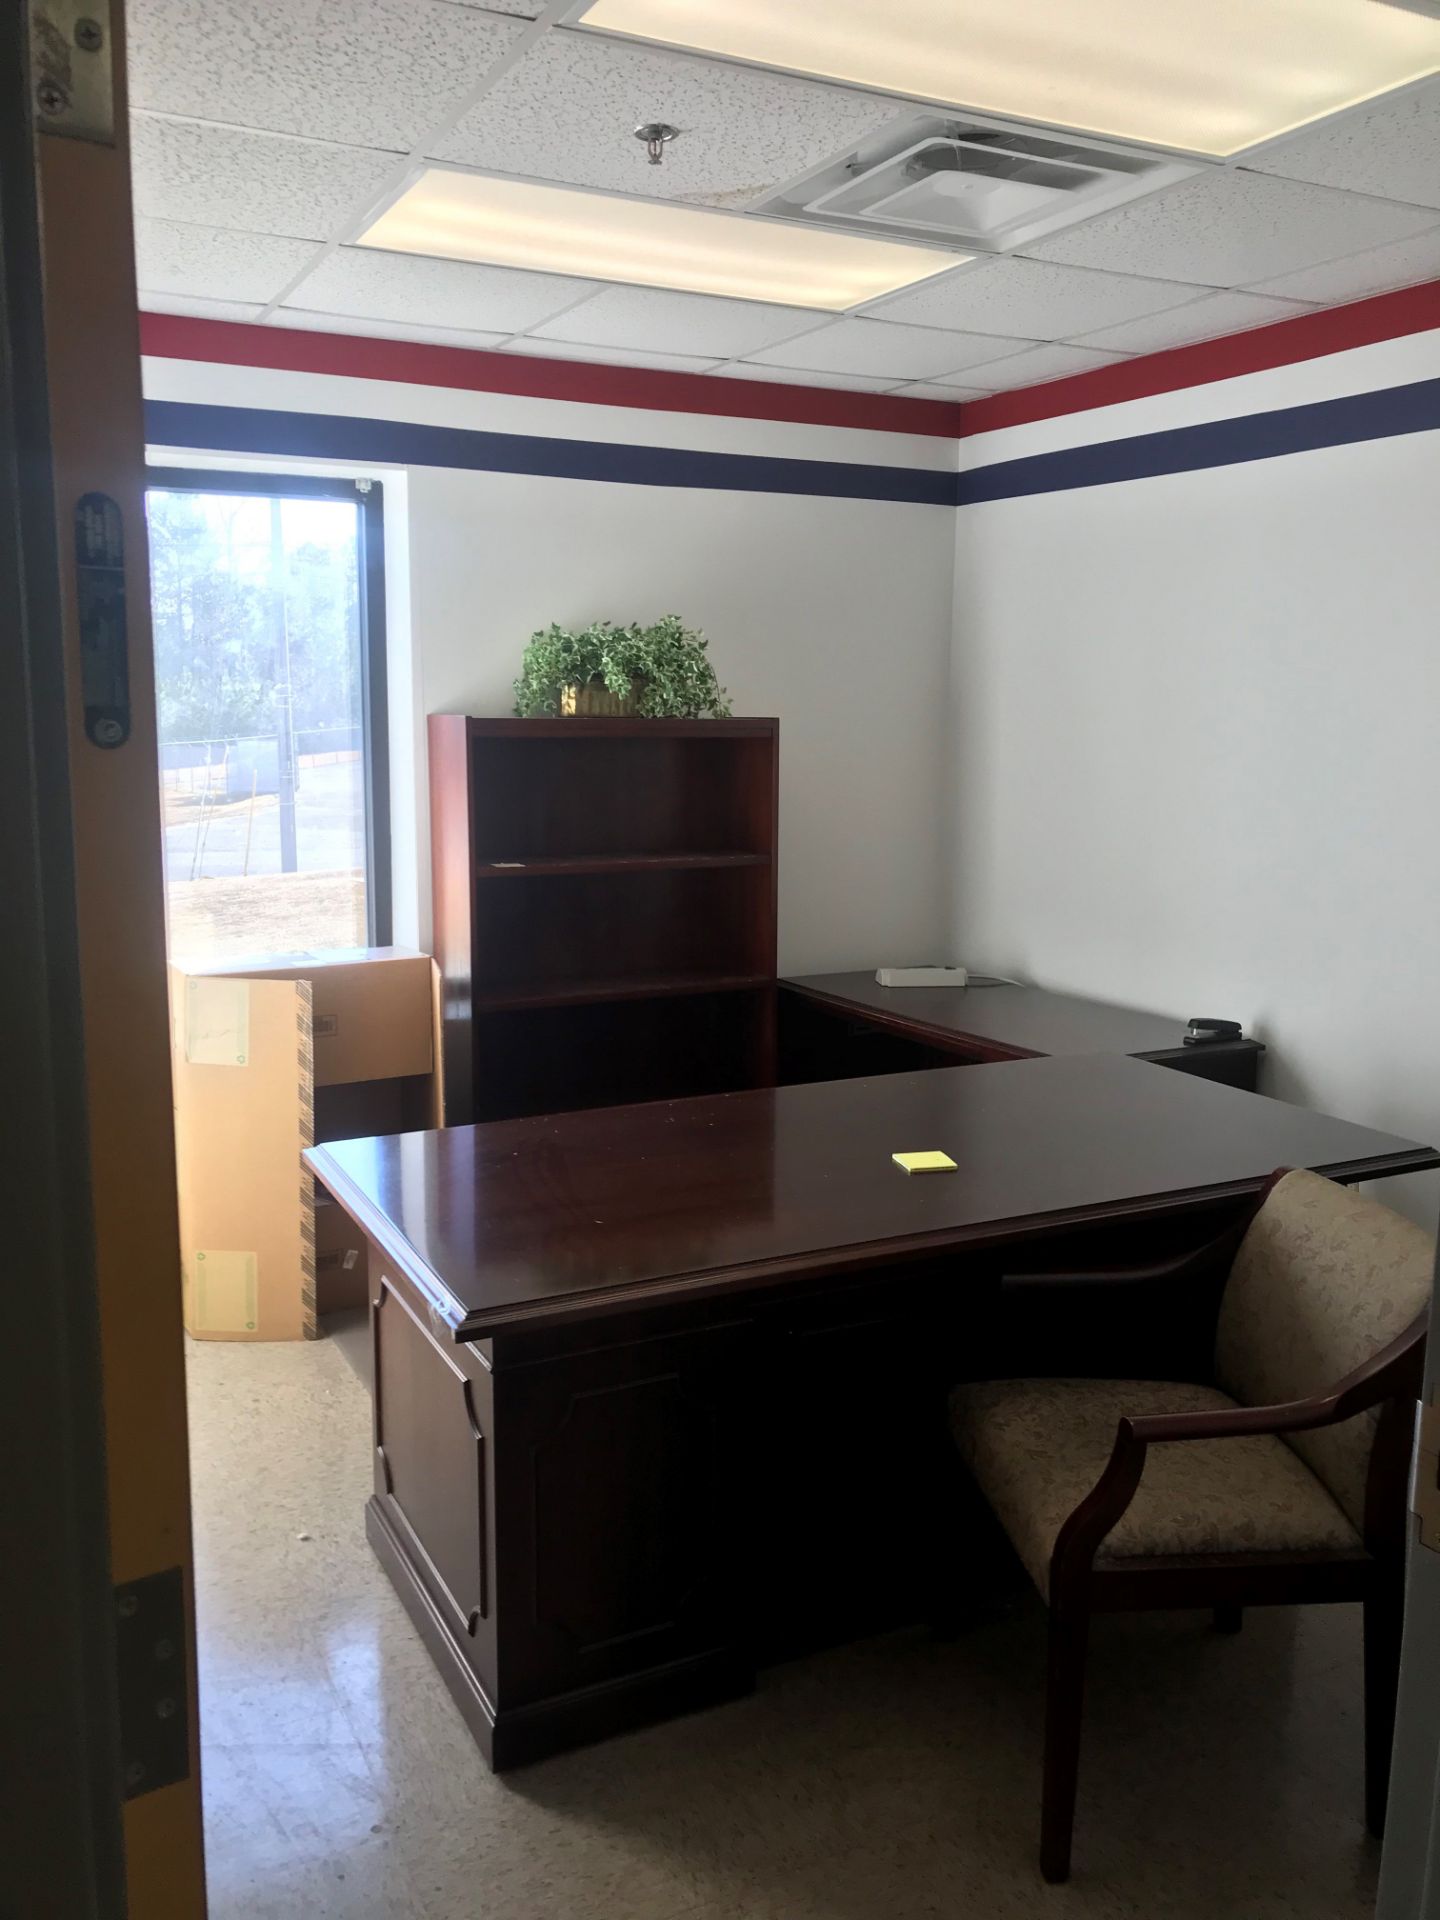 LOT: Contents of Office consisting of Desk, Book Shelf, Side Table, (2) Chairs (LOCATED IN BESSEMER,